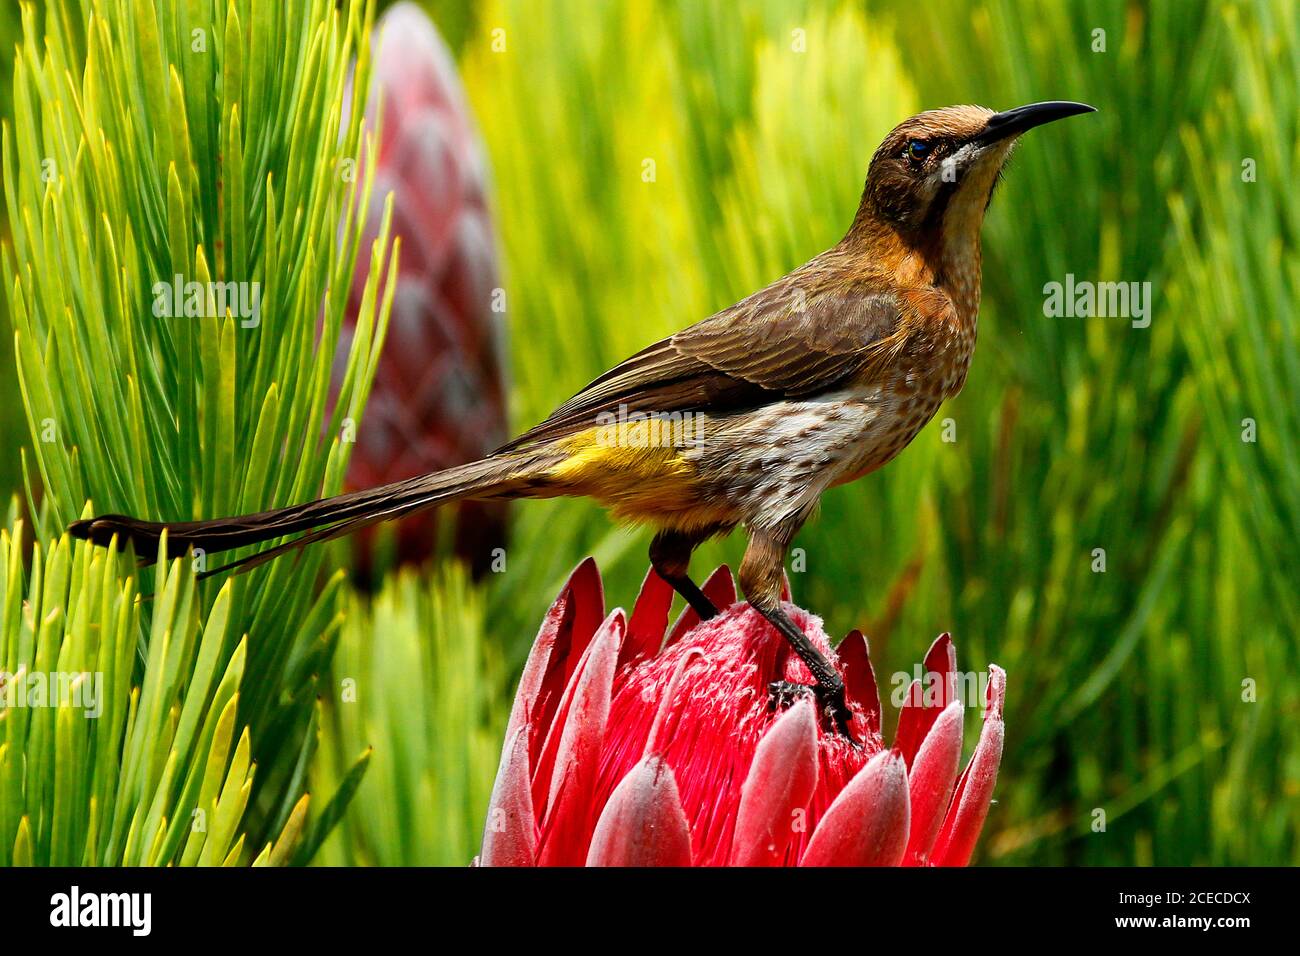 A female Cape sugarbird feeding on the nectar deep inside a protea flower-head. The males of this species have very long tails. Stock Photo